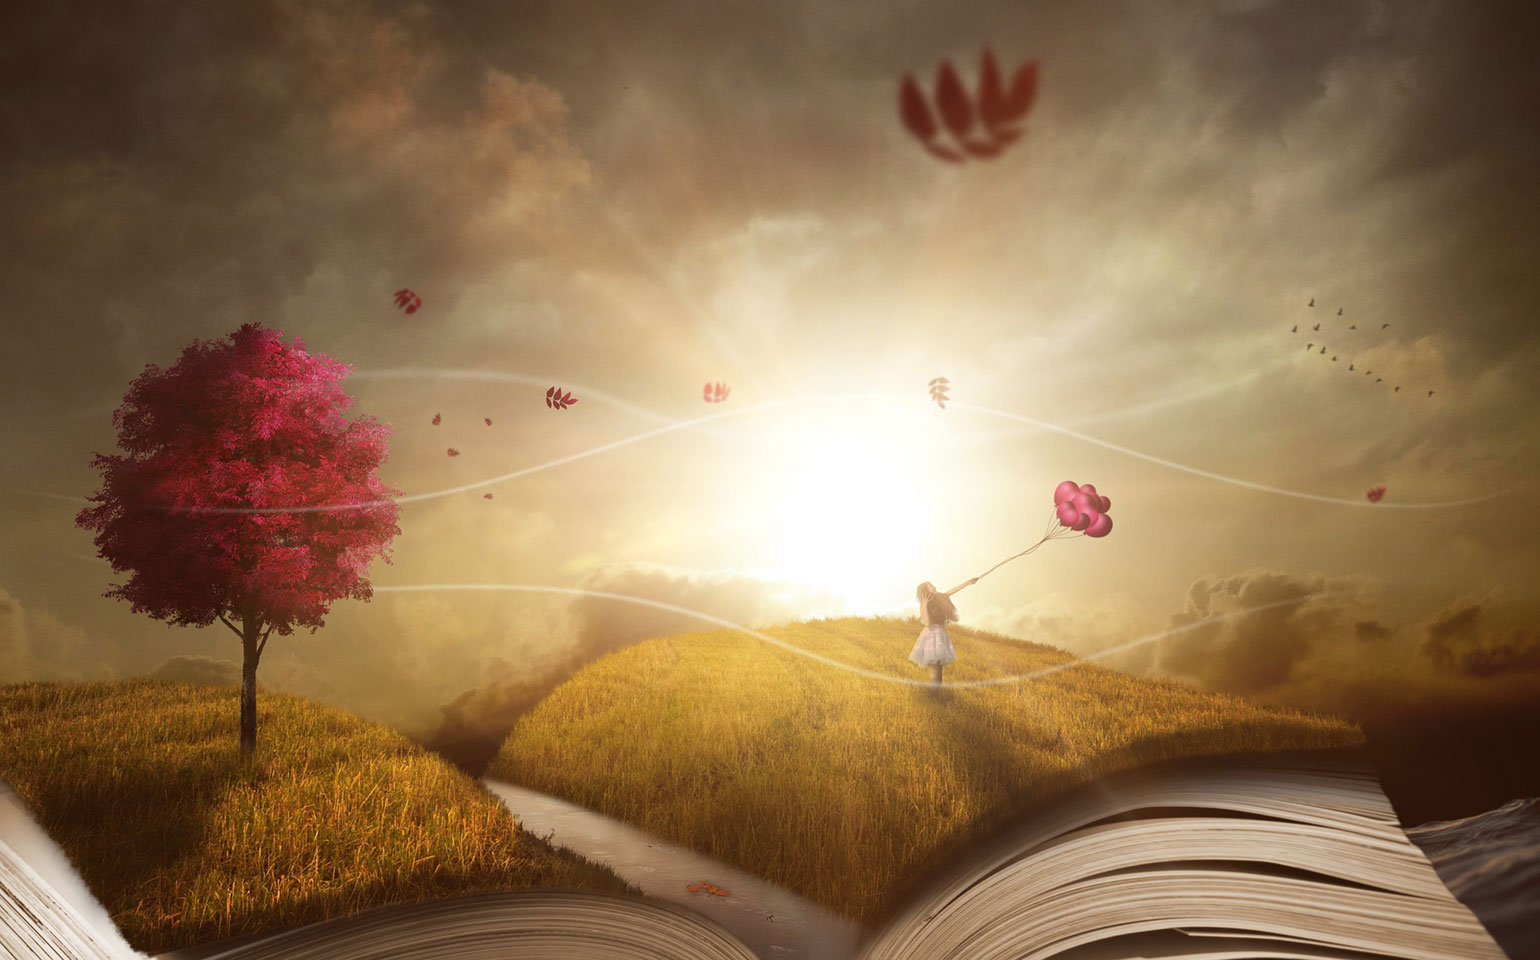 The pages of a book unfurl into a vast grassland with trees to symbolize imagination.